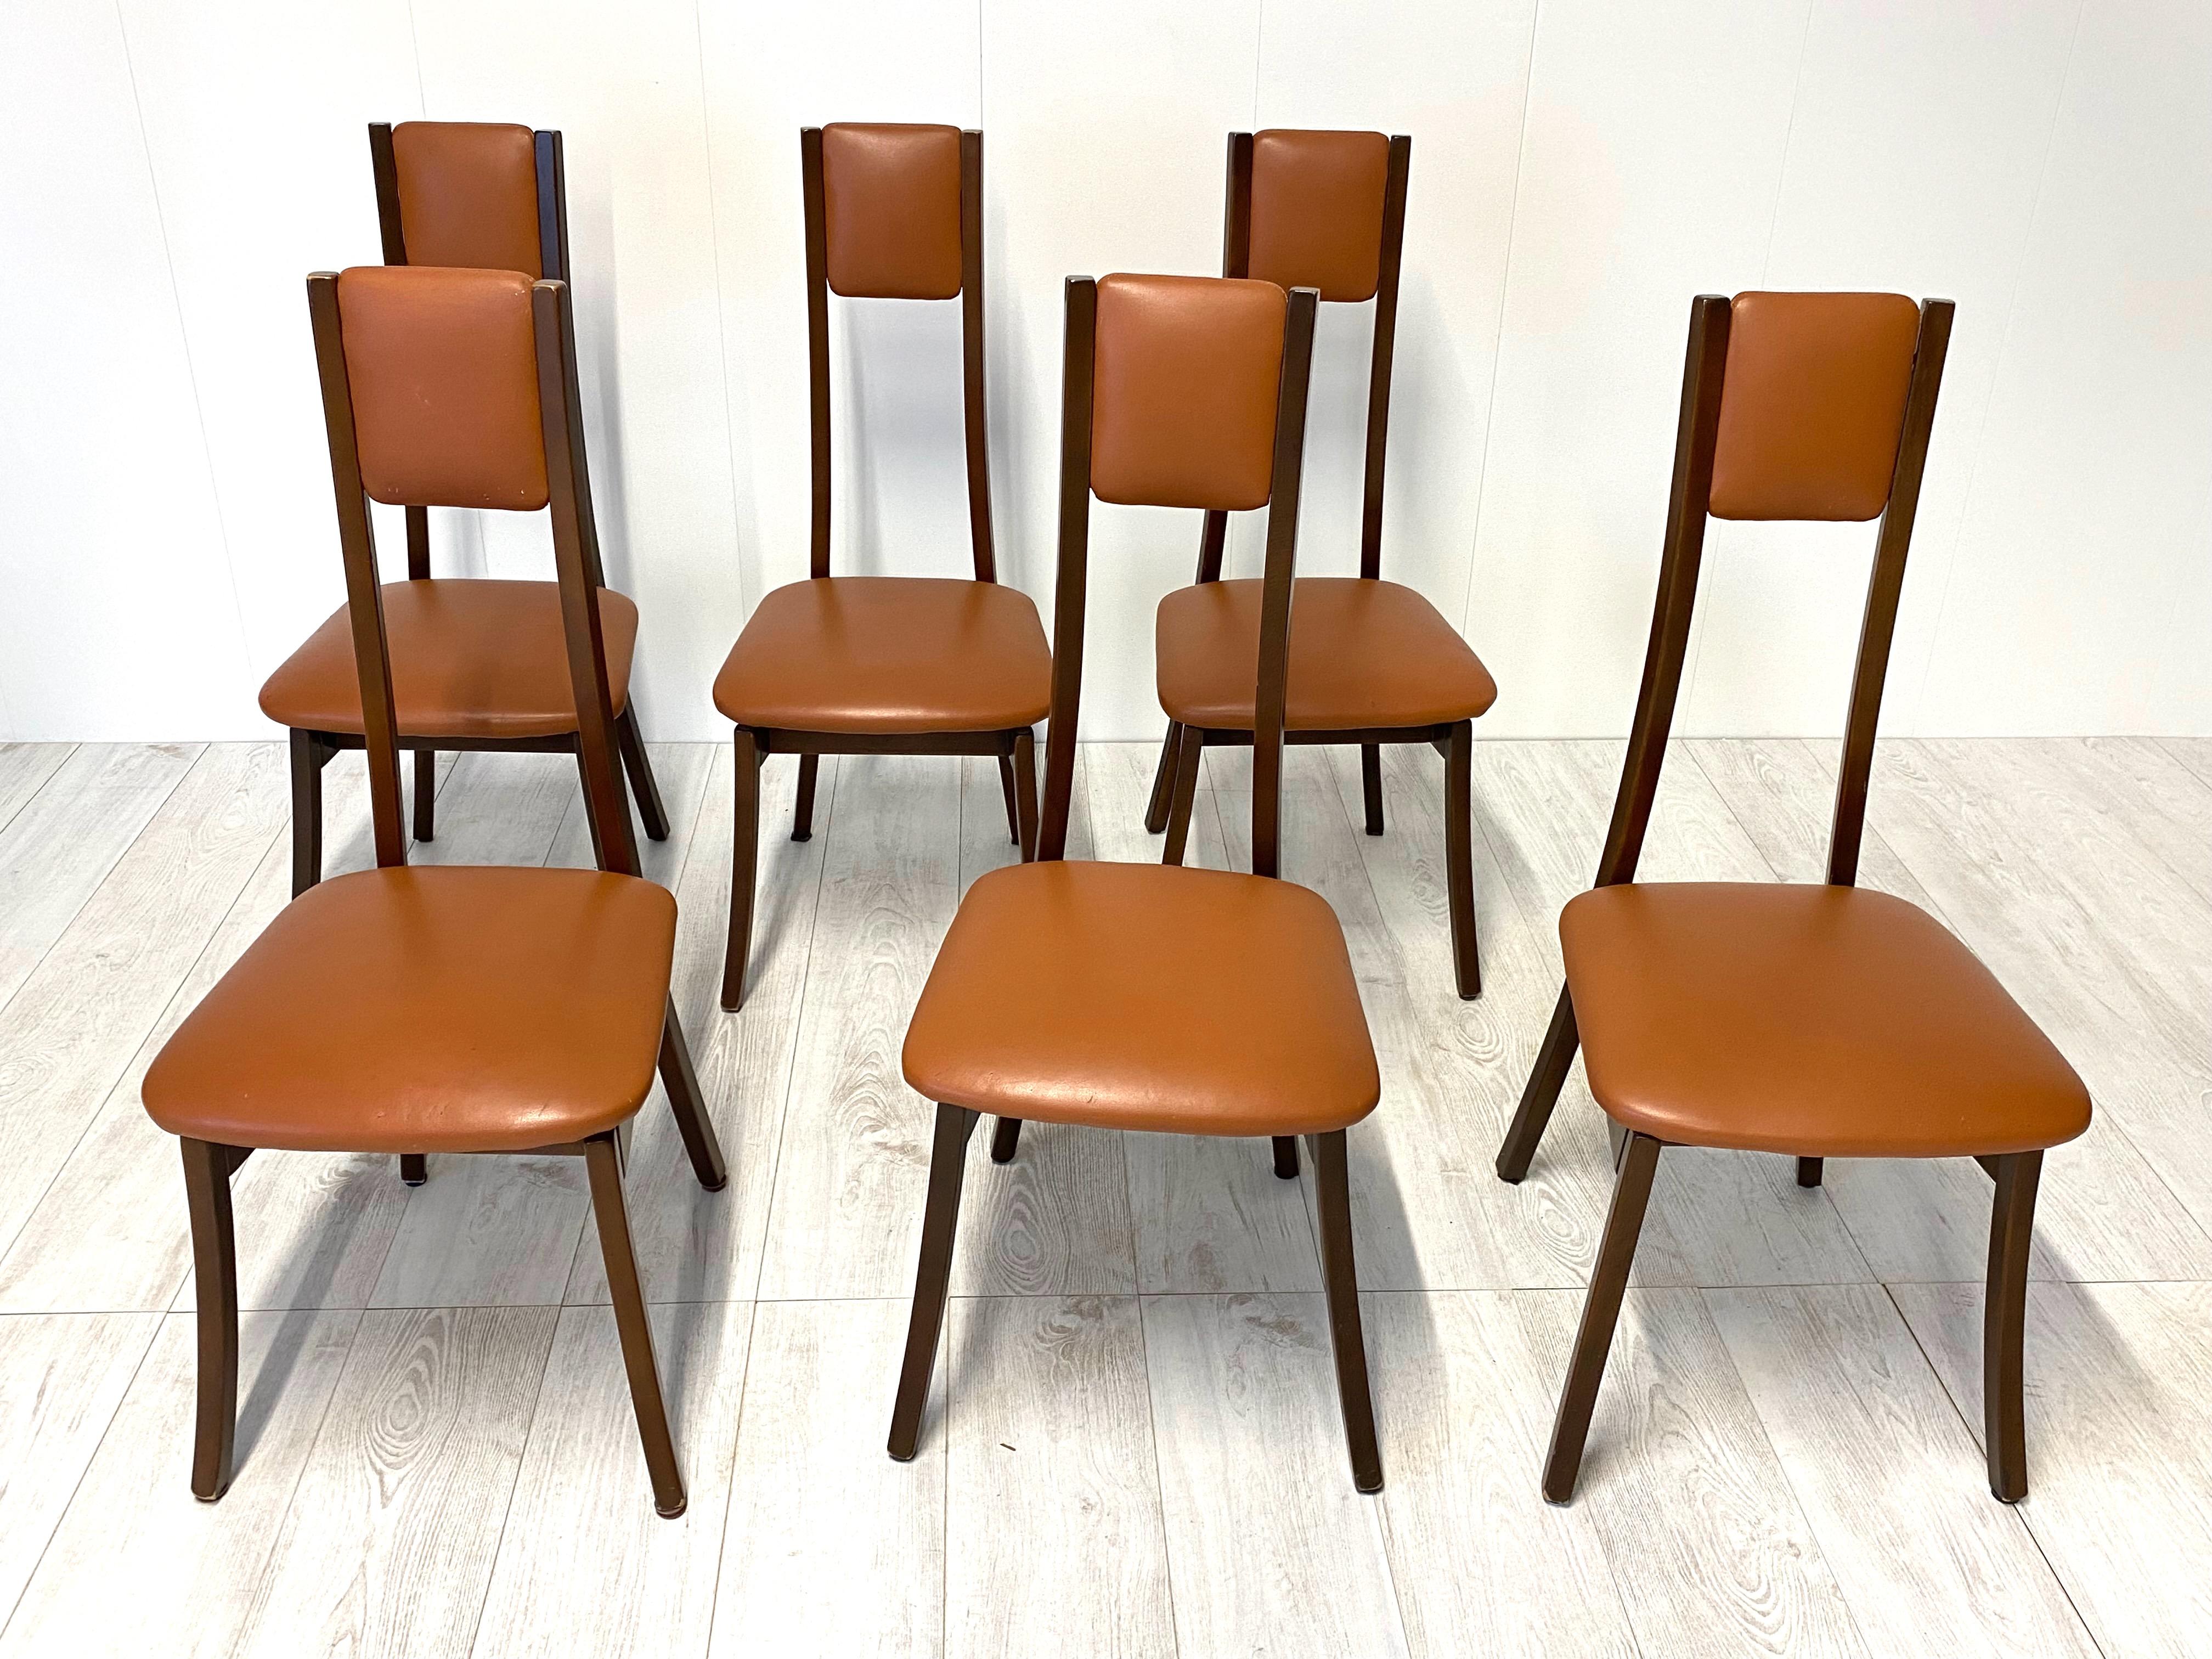 Late 20th Century Model Programma S11 Dining Chairs by Angelo Mangiarotti, Set of 6 For Sale